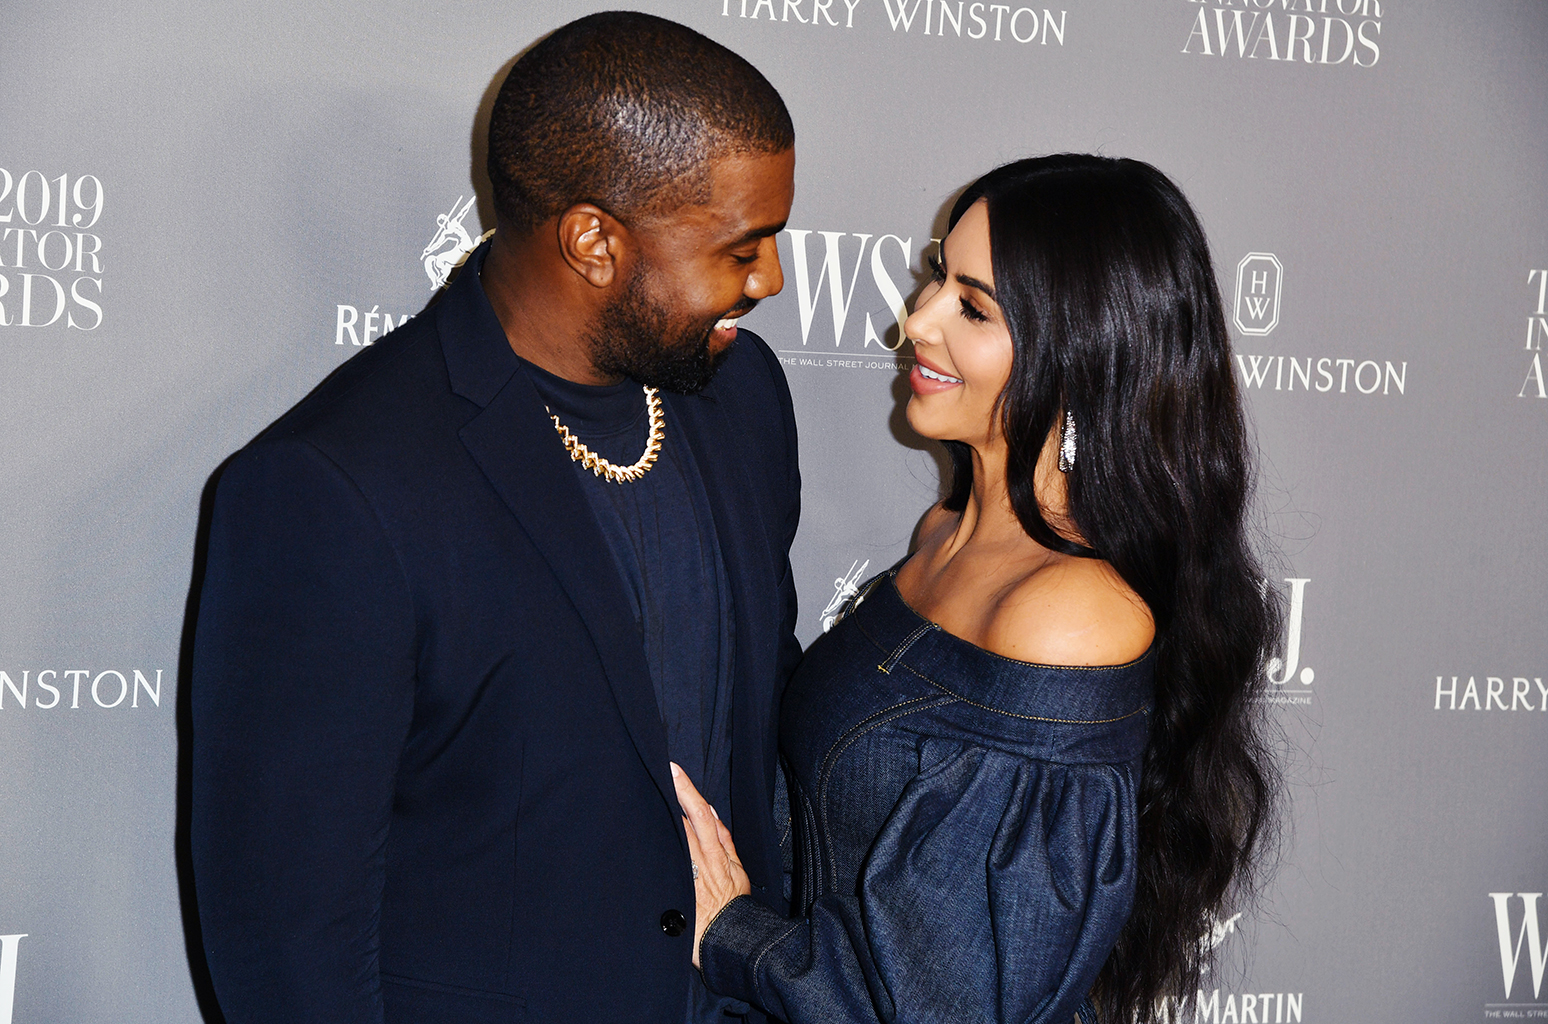 Kim Kardashian Gushes Over 'Thoughtful' Gift From Kanye West, a Necklace Engraved With One of His Texts